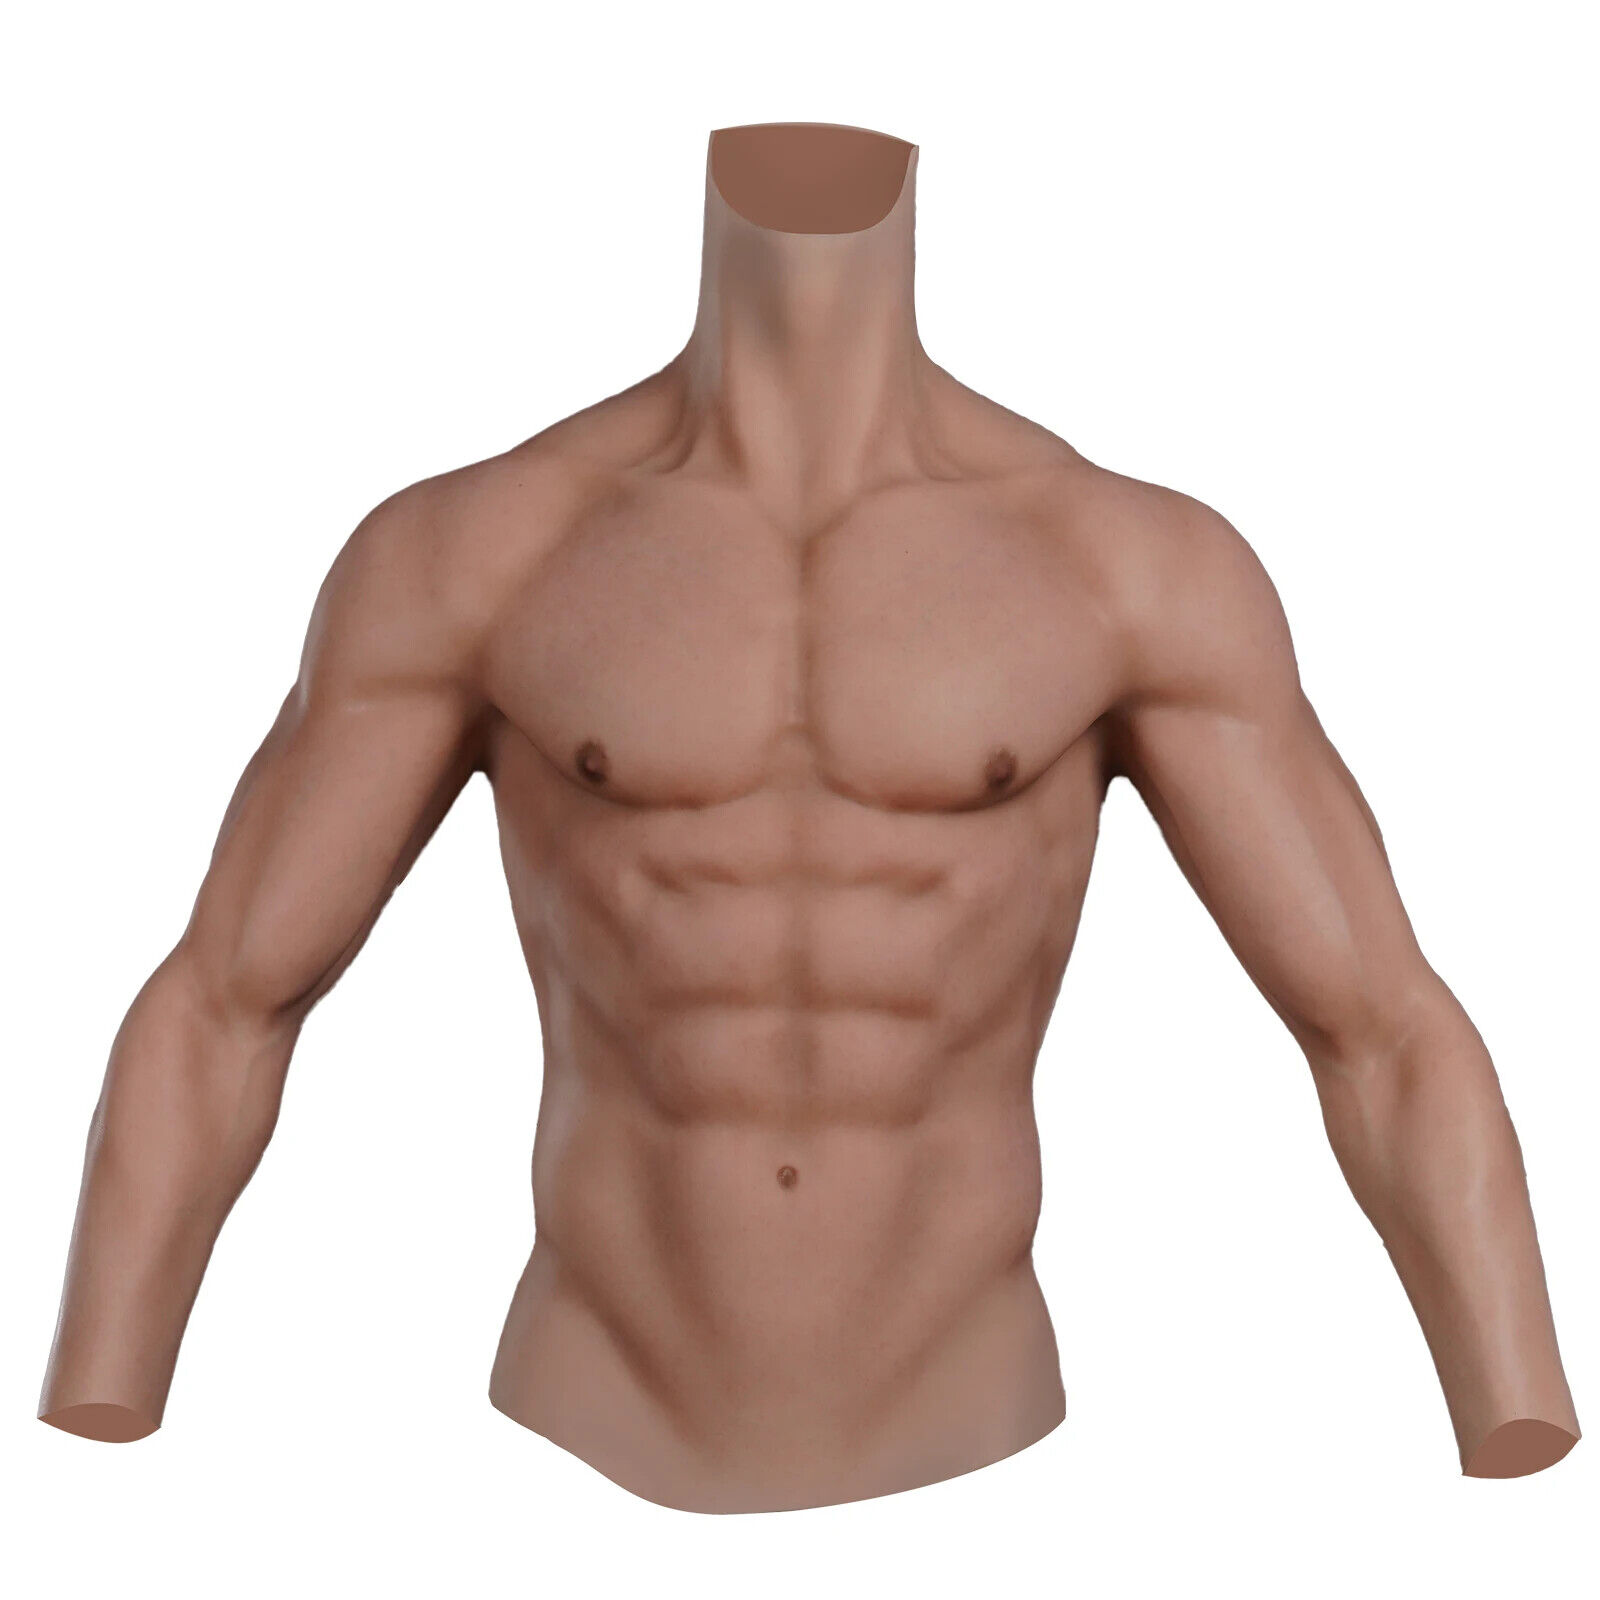 Handmade Realistic Silicone Muscles Cosplay Costumes Fake Abs Belly Crossdresser